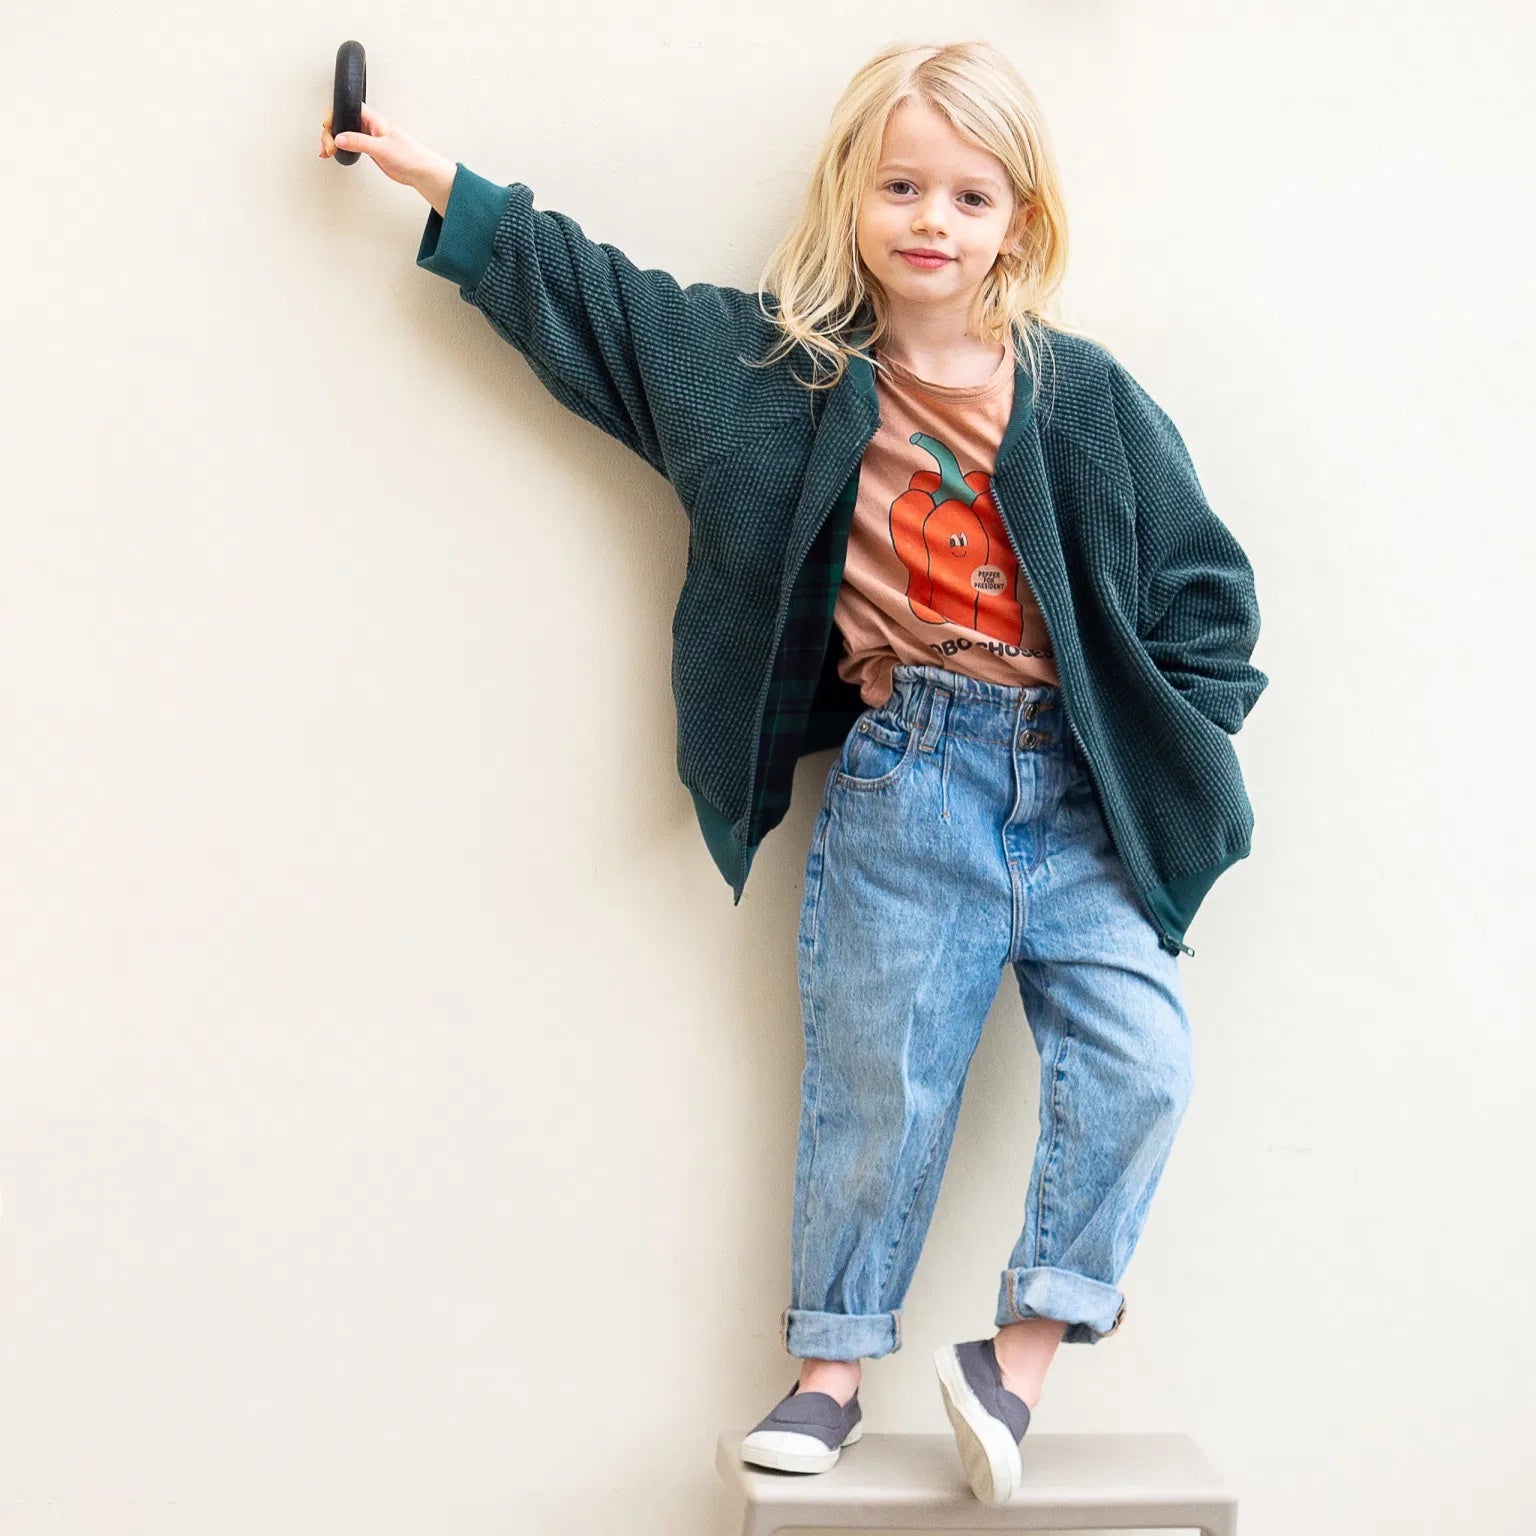 Child wearing the Baby/Child/Teen Cato Bomber Jacket sewing pattern from WISJ on The Fold Line. A jacket pattern made in canvas, oilskin, cotton or softshell, french terry, corduroy or knitted fabrics, featuring raglan sleeves, pockets, long sleeves with 